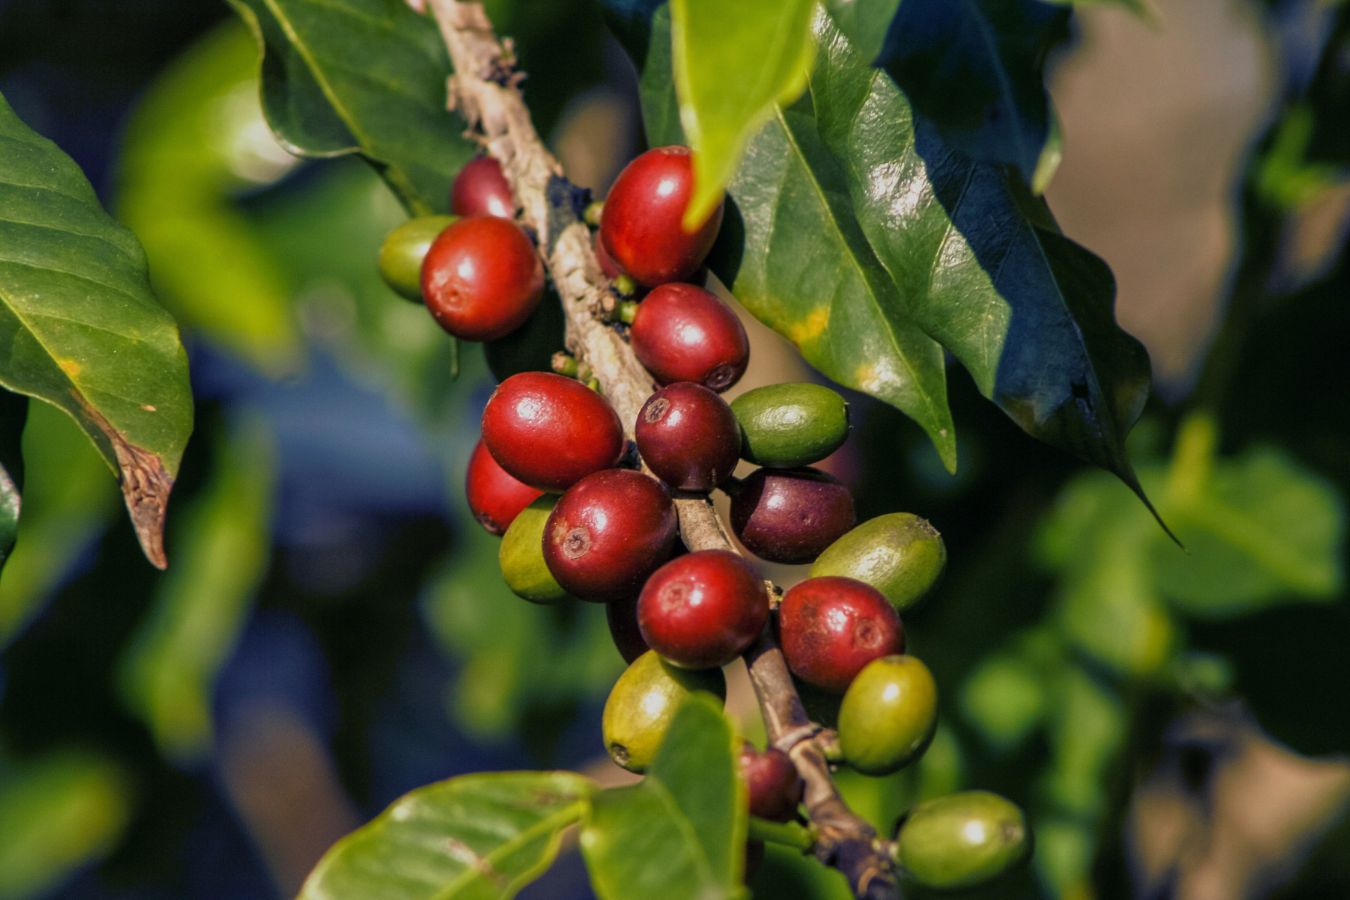 re-cultivation-has-brought-coffee-productivity-in-vietnam-to-3-times-higher-than-the-world